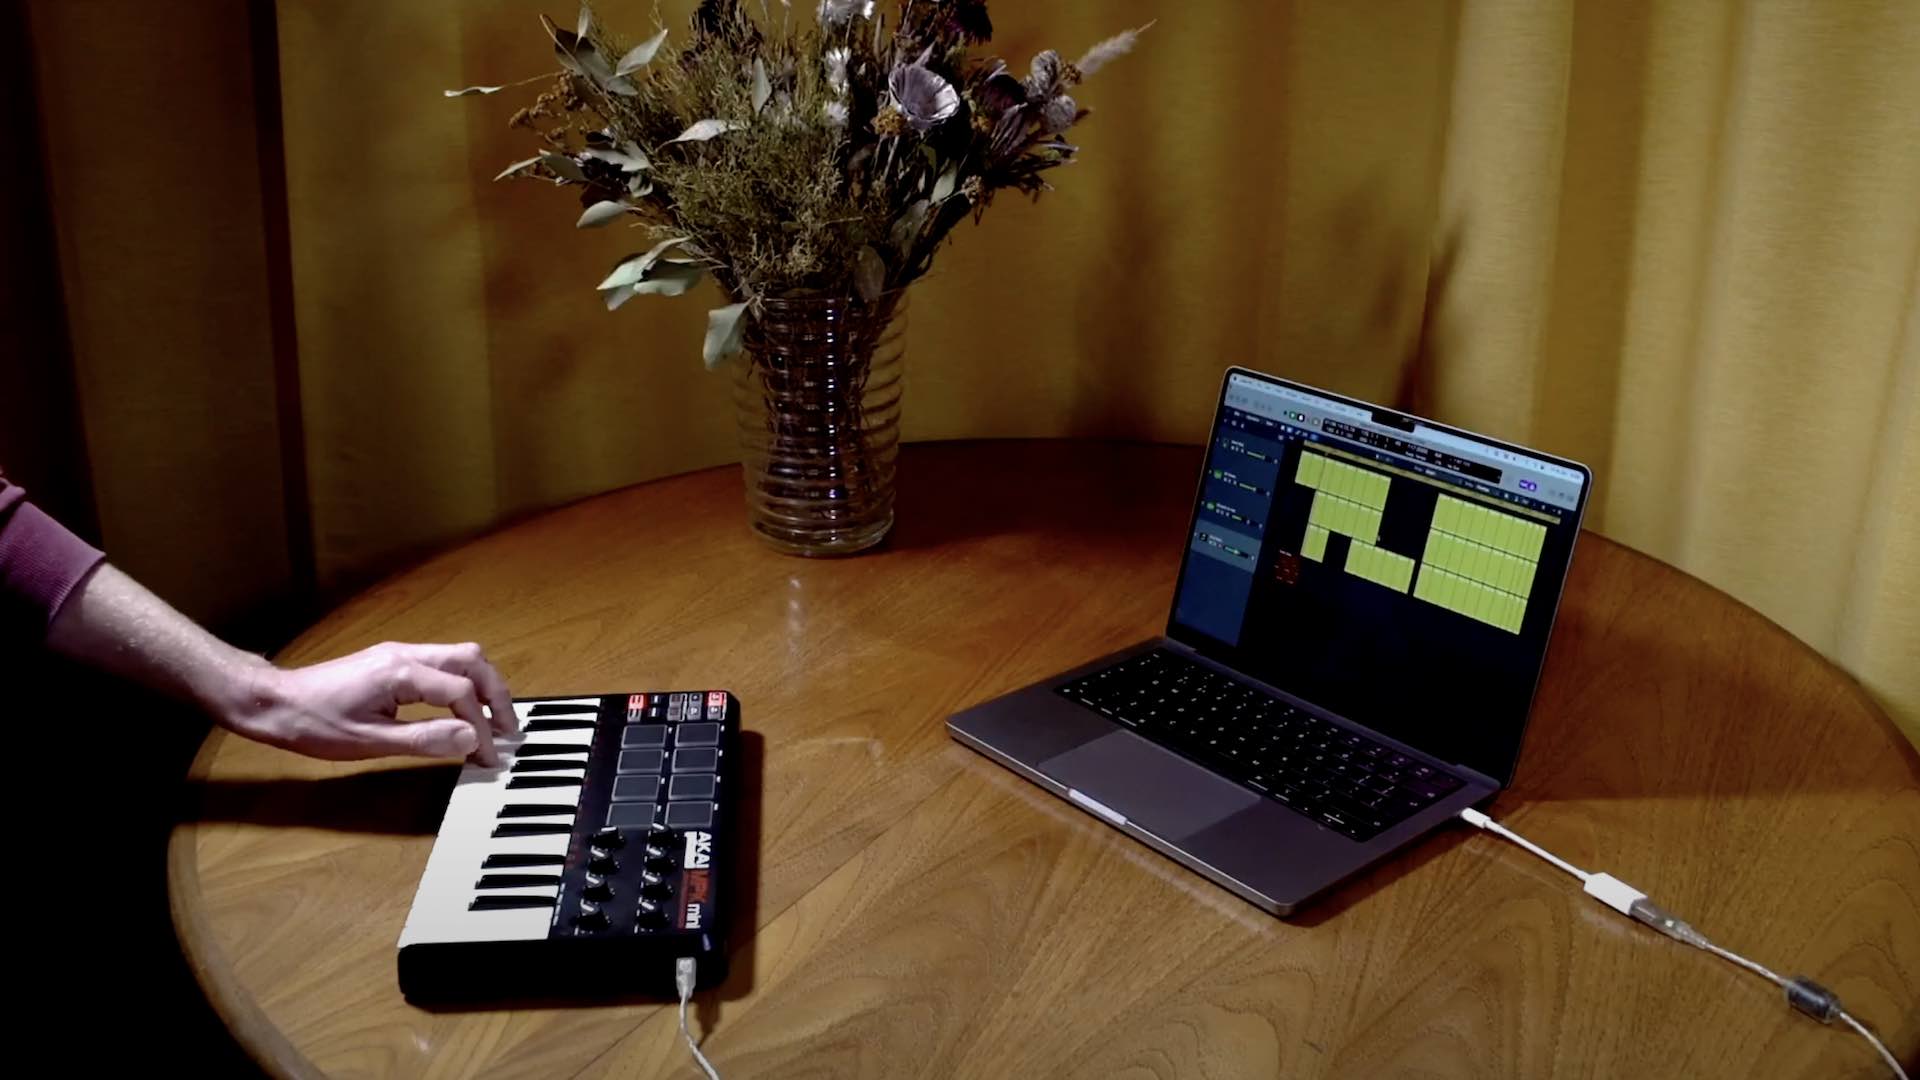 A hand playing a small keyboard attached to a laptop on a wooden table with a bunch of flowers on it